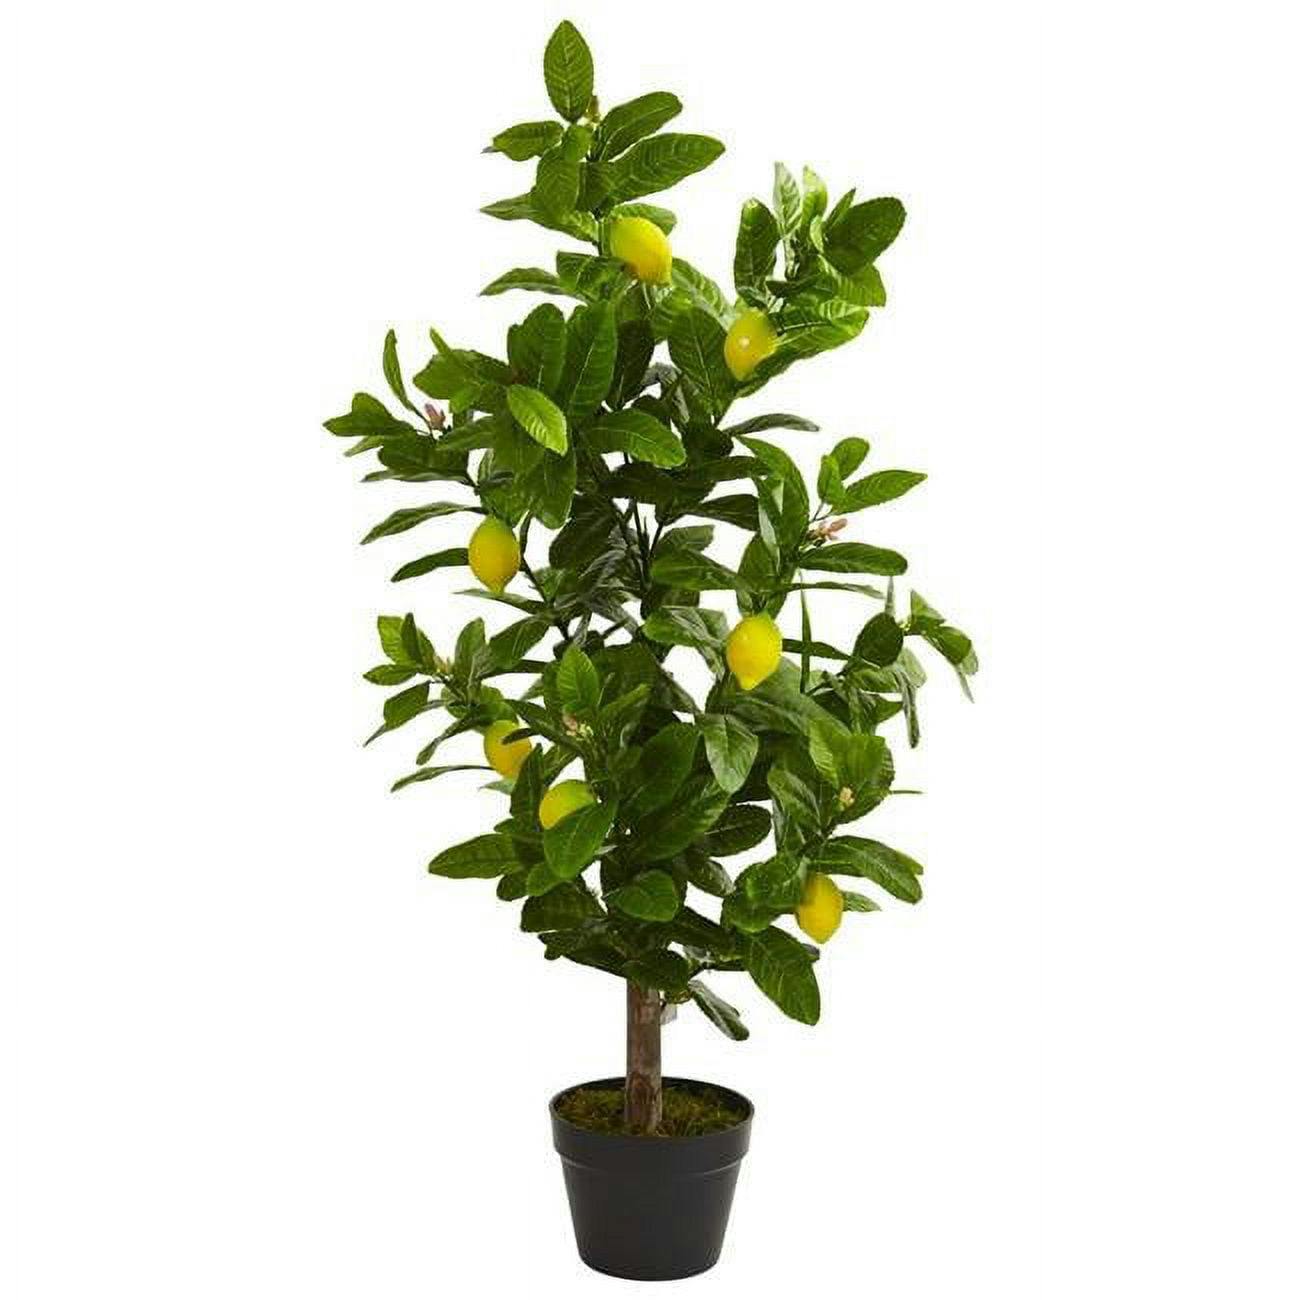 Lush Green and Bright Yellow 3ft Lemon Artificial Potted Tree